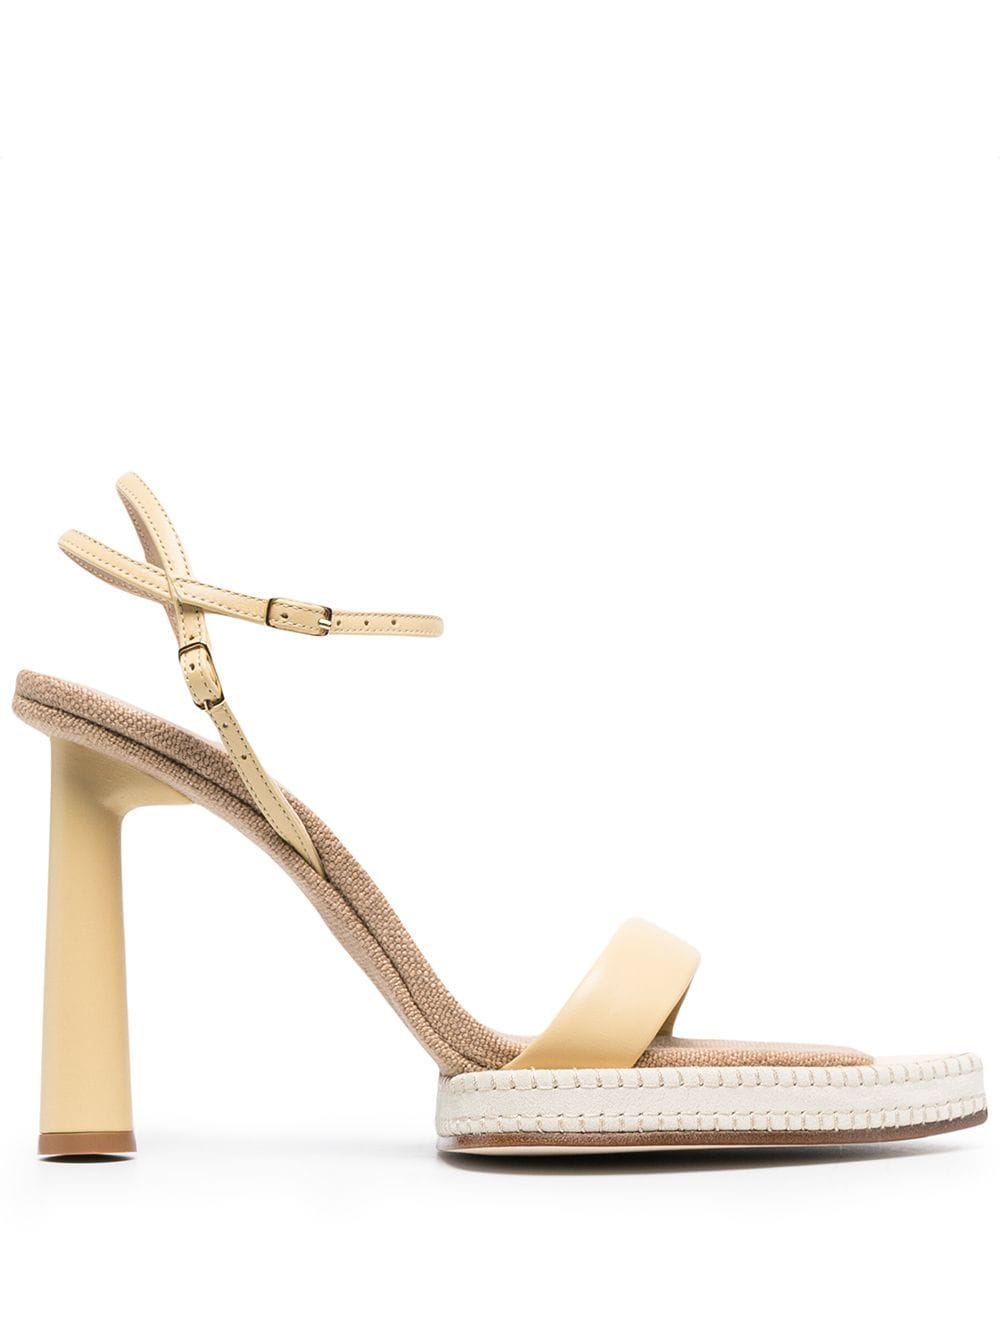 Jacquemus pointed-toe Heeled Sandals - Farfetch